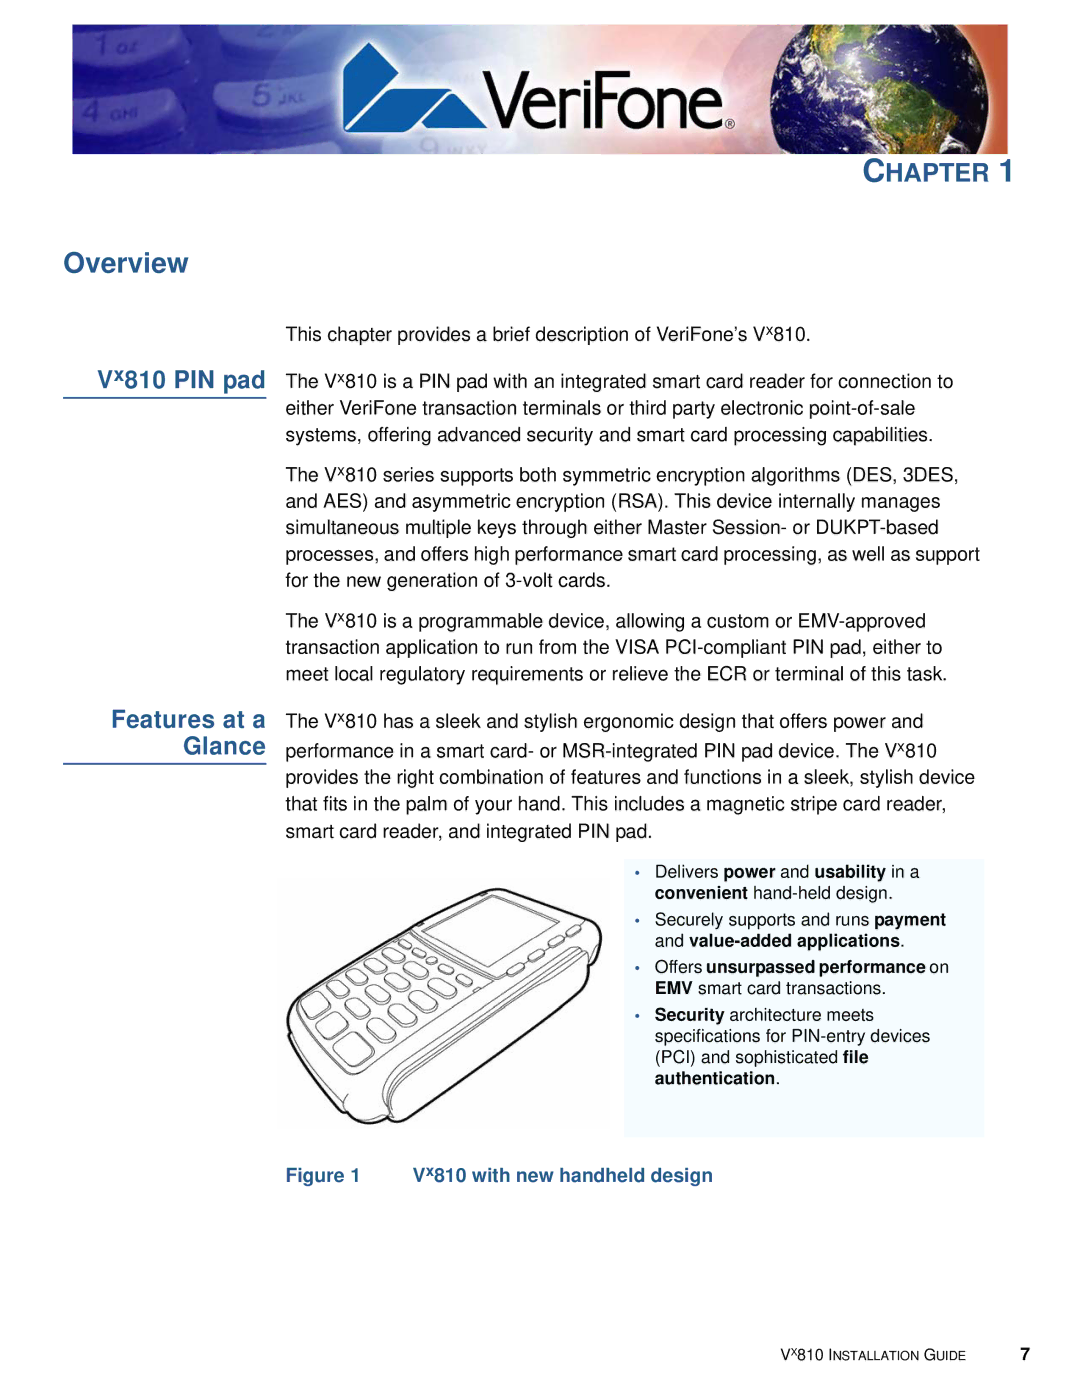 VeriFone manual Vx810 PIN pad, Features at a Glance 